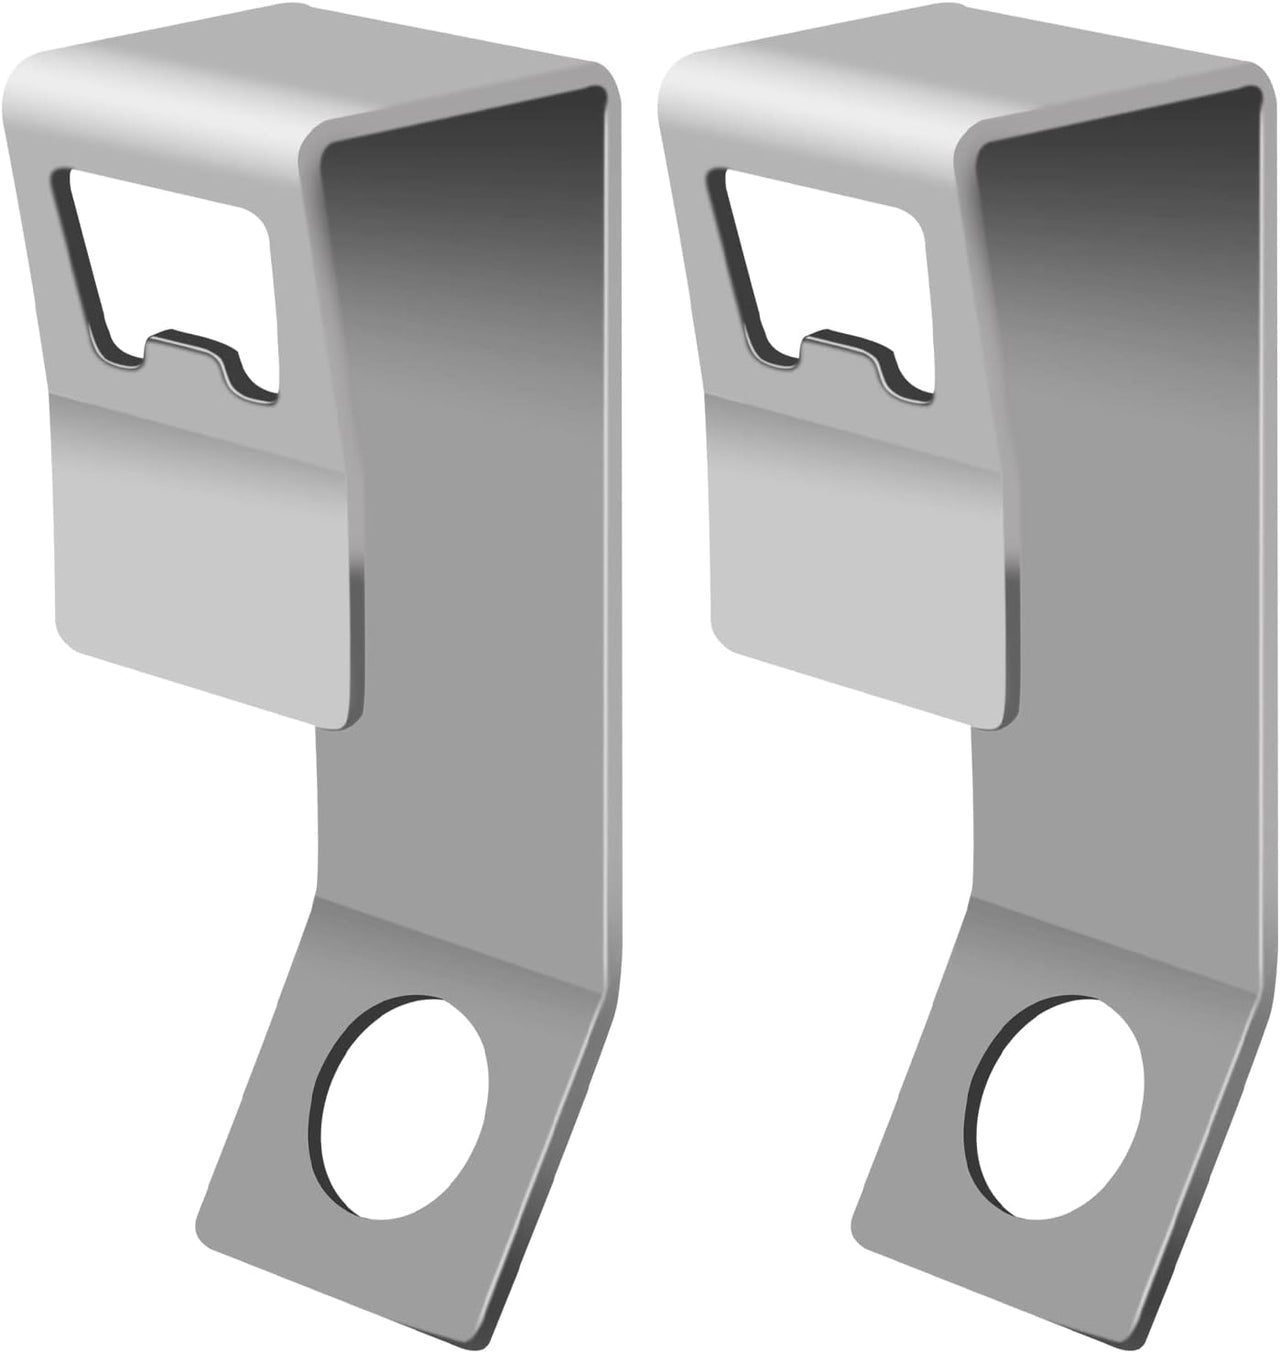 Cooler Lock Bracket. 2 Pack with Bottle Opener. Tie Down Kit Made of Durable Stainless Steel. Compatible with Yeti/RTIC Coolers